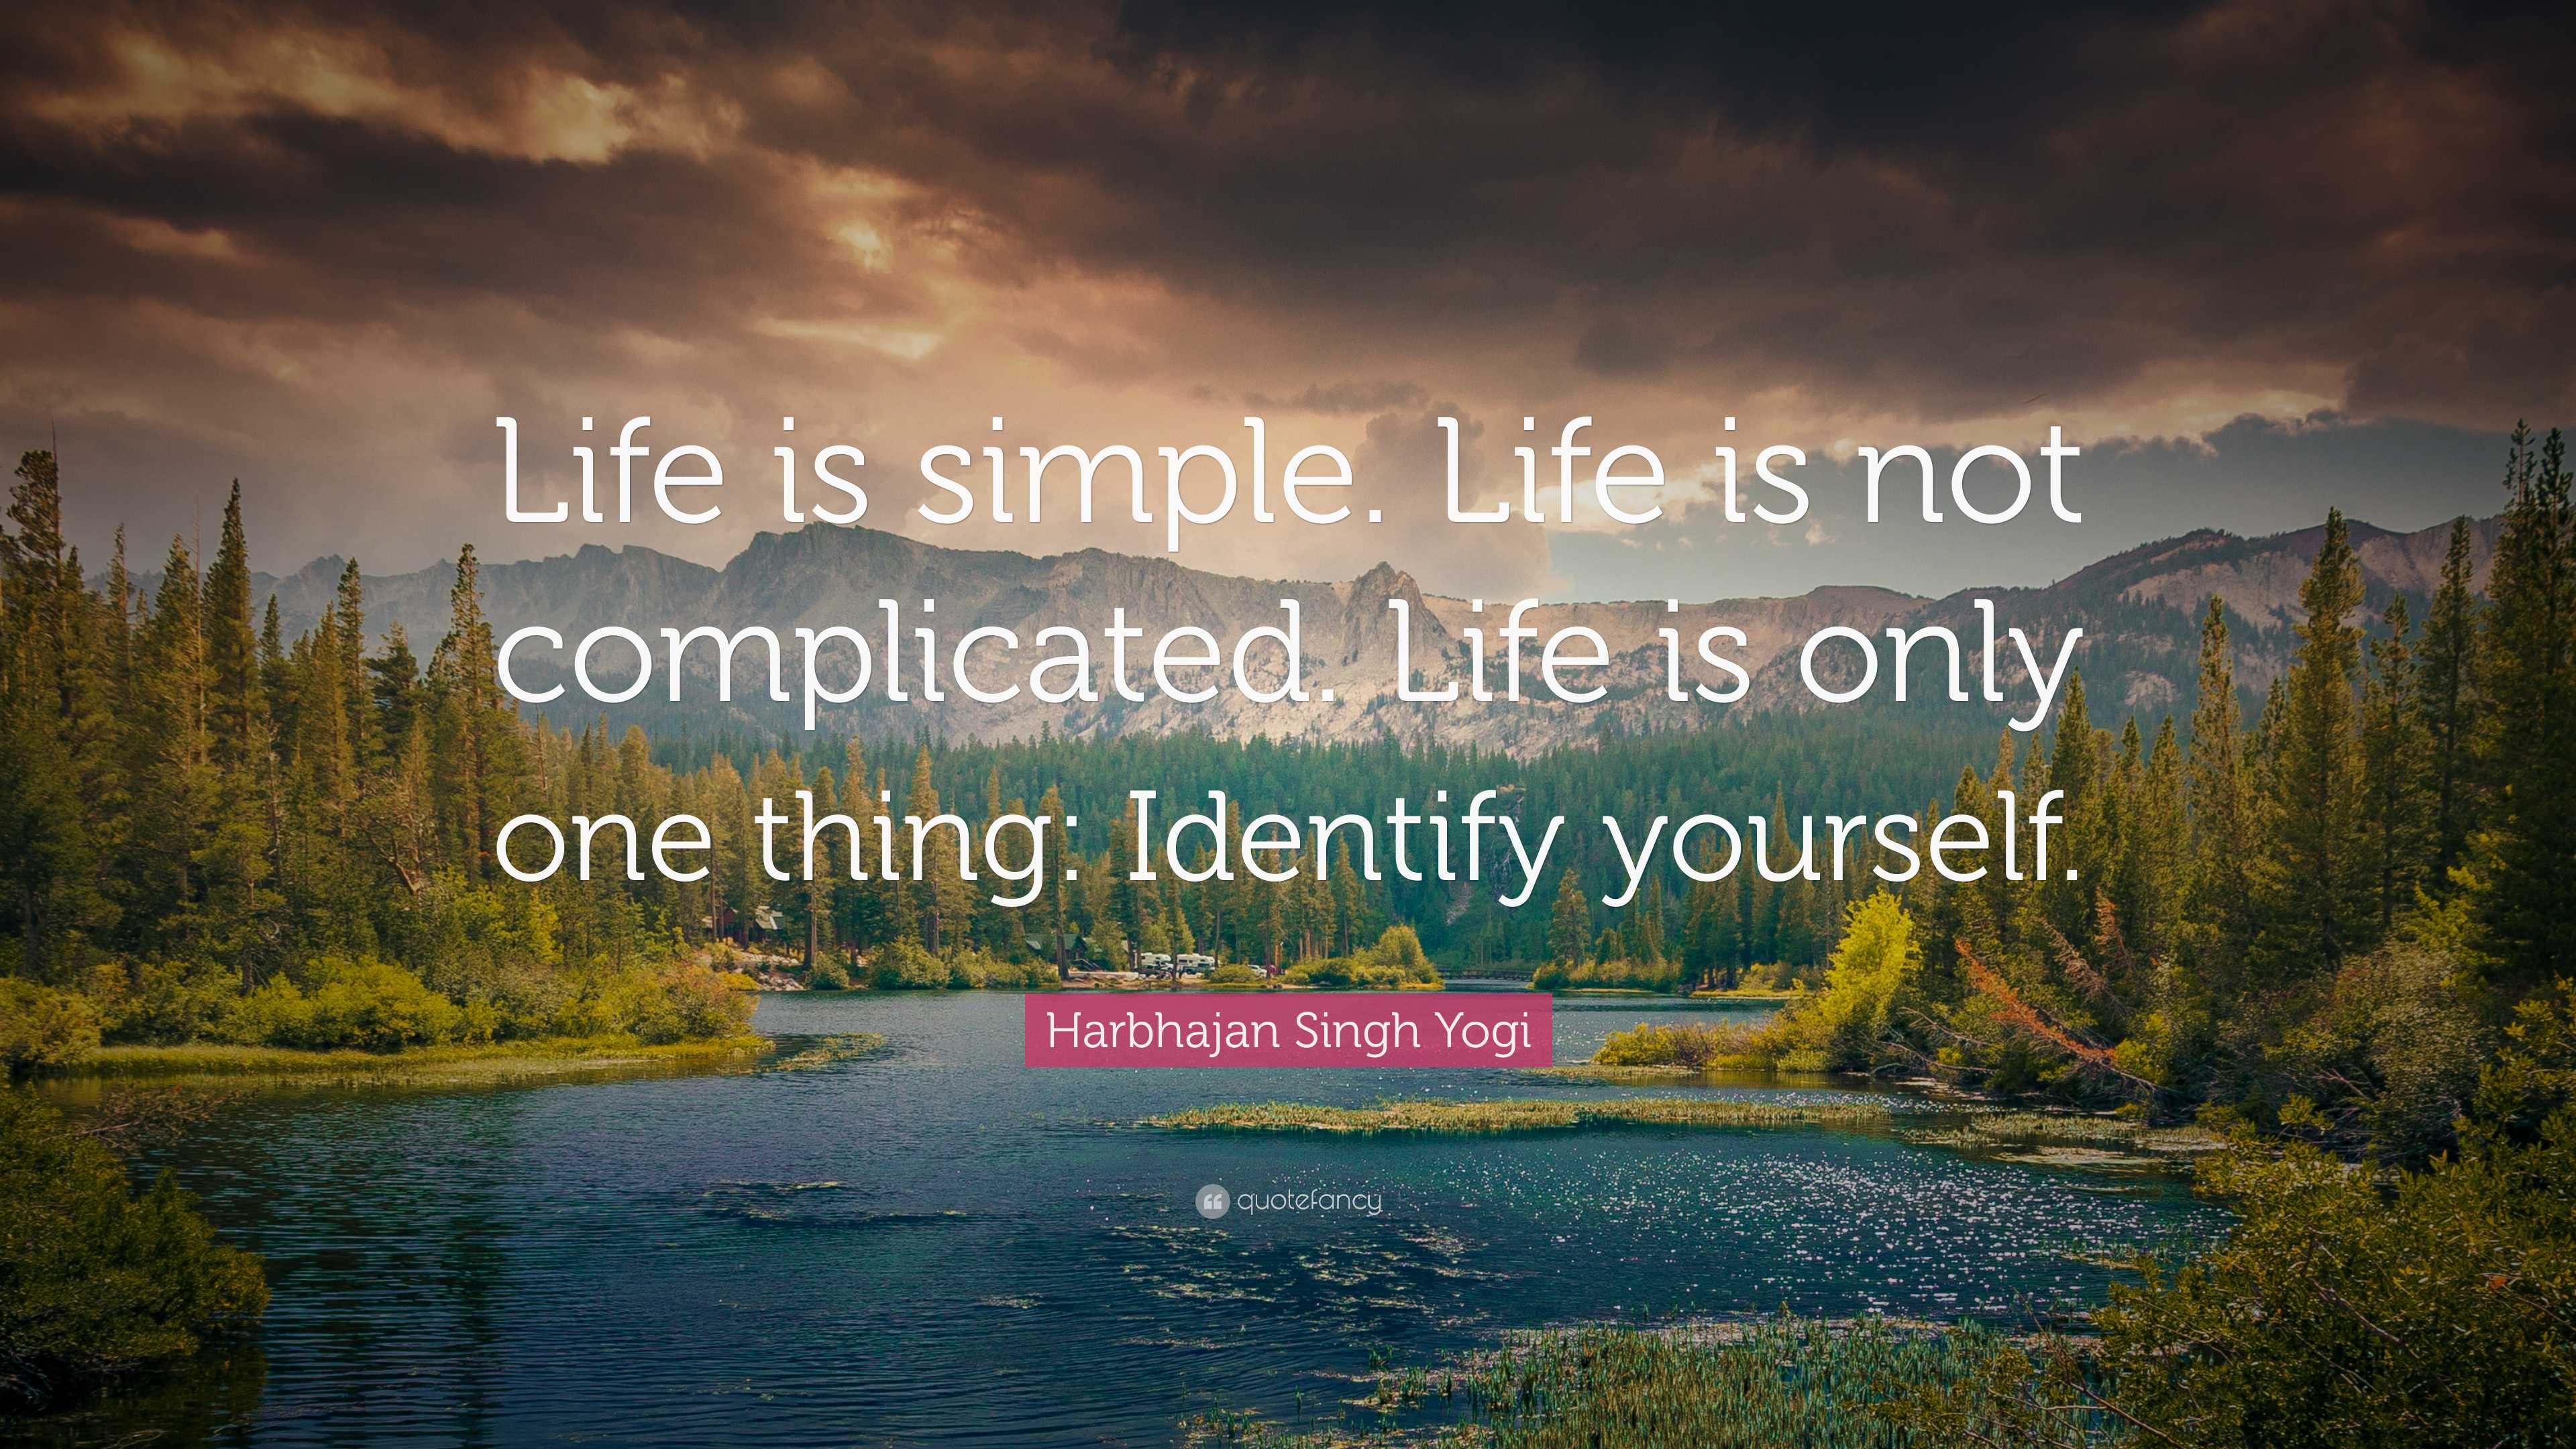 Harbhajan Singh Yogi Quote: “Life is simple. Life is not complicated ...